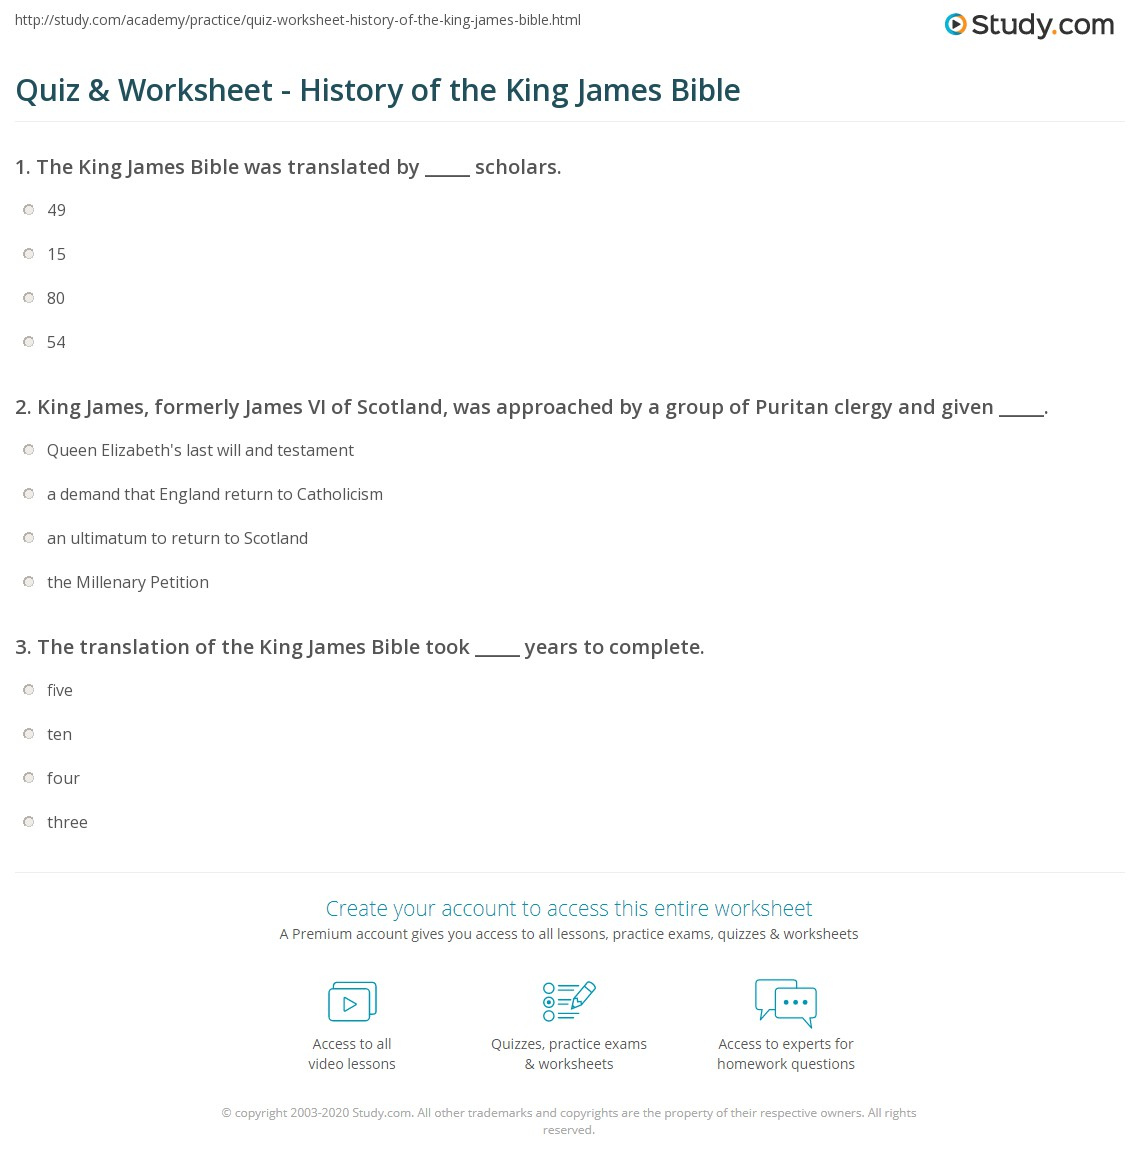 Printable Kjv Bible Trivia Questions And Answers That Are Dashing Roy 